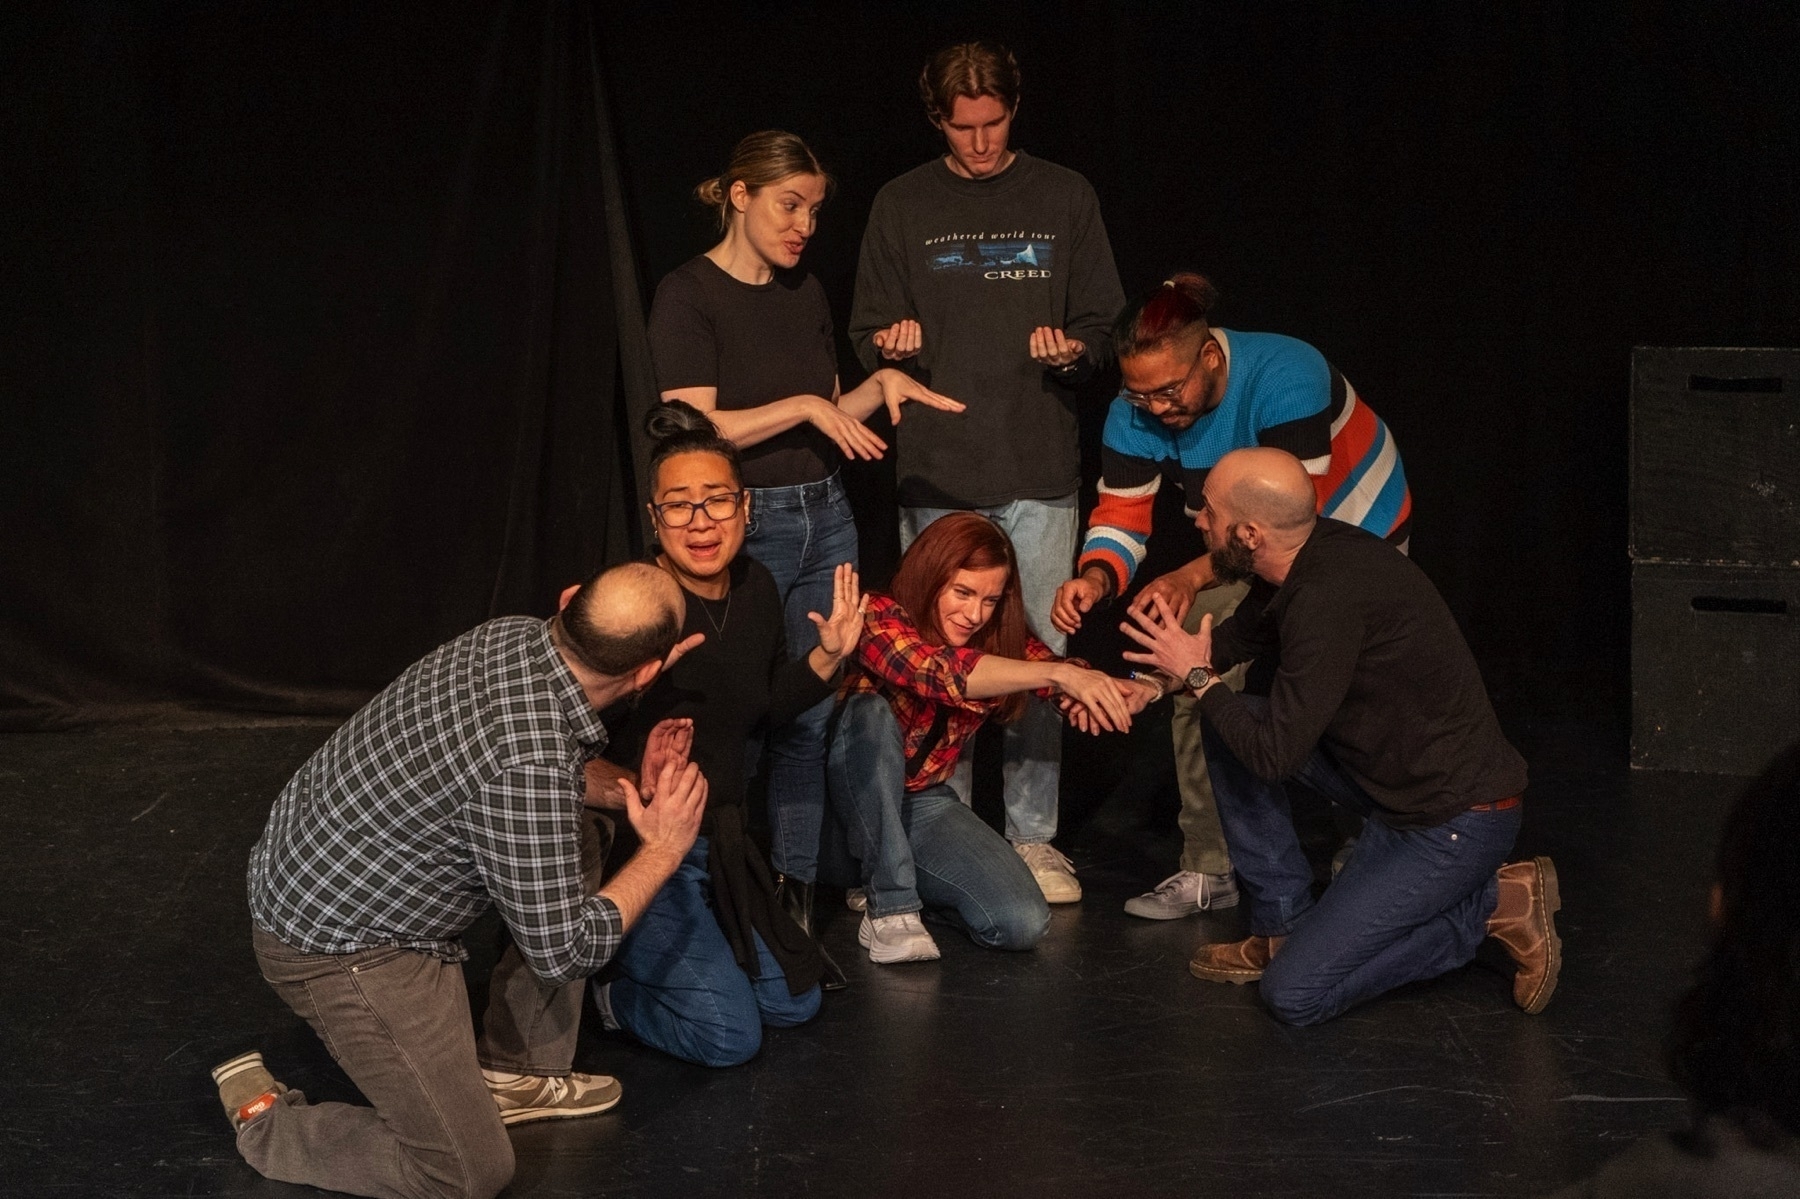 Seven individuals are actively participating in a dramatic scene on a black-box theater stage. They are gathered in a close semi-circle around a woman in the center who is crouched low to the ground, reaching out dramatically with one hand. The other performers are variously crouching or standing, with expressions and gestures of intense focus or concern directed towards the center. They are dressed in everyday casual wear, suggesting an improvisational or rehearsal setting. The stage backdrop is plain black, highlighting the actors, and the lighting casts well-defined shadows, enhancing the sense of a theatrical performance.